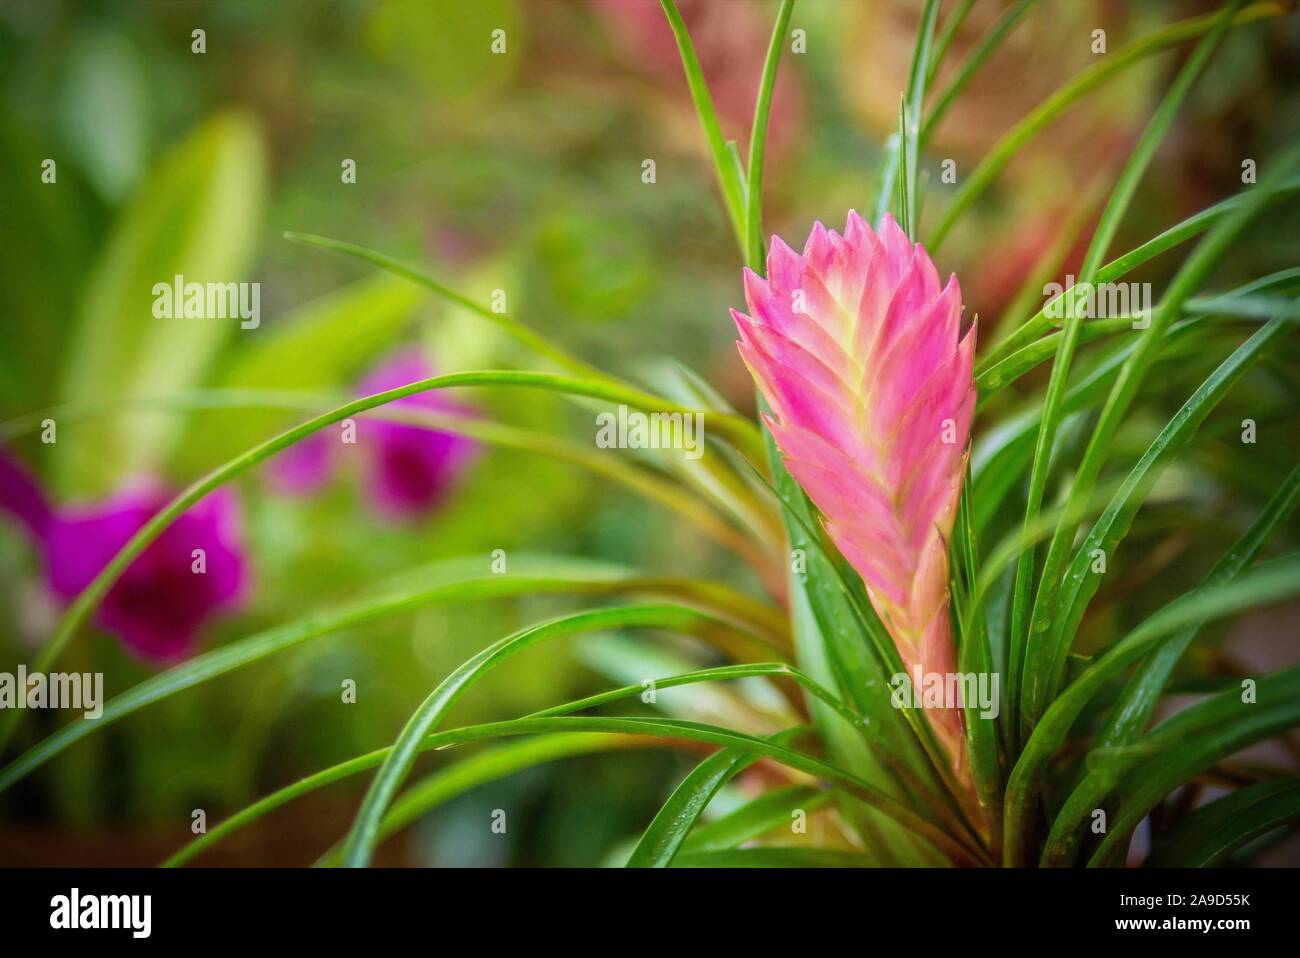 The pink bloom of a Pink Quill bromeliad (Tillandsia cyanea), a tropical flowering perennial plant species native to the rainforests of Ecuador. Stock Photo